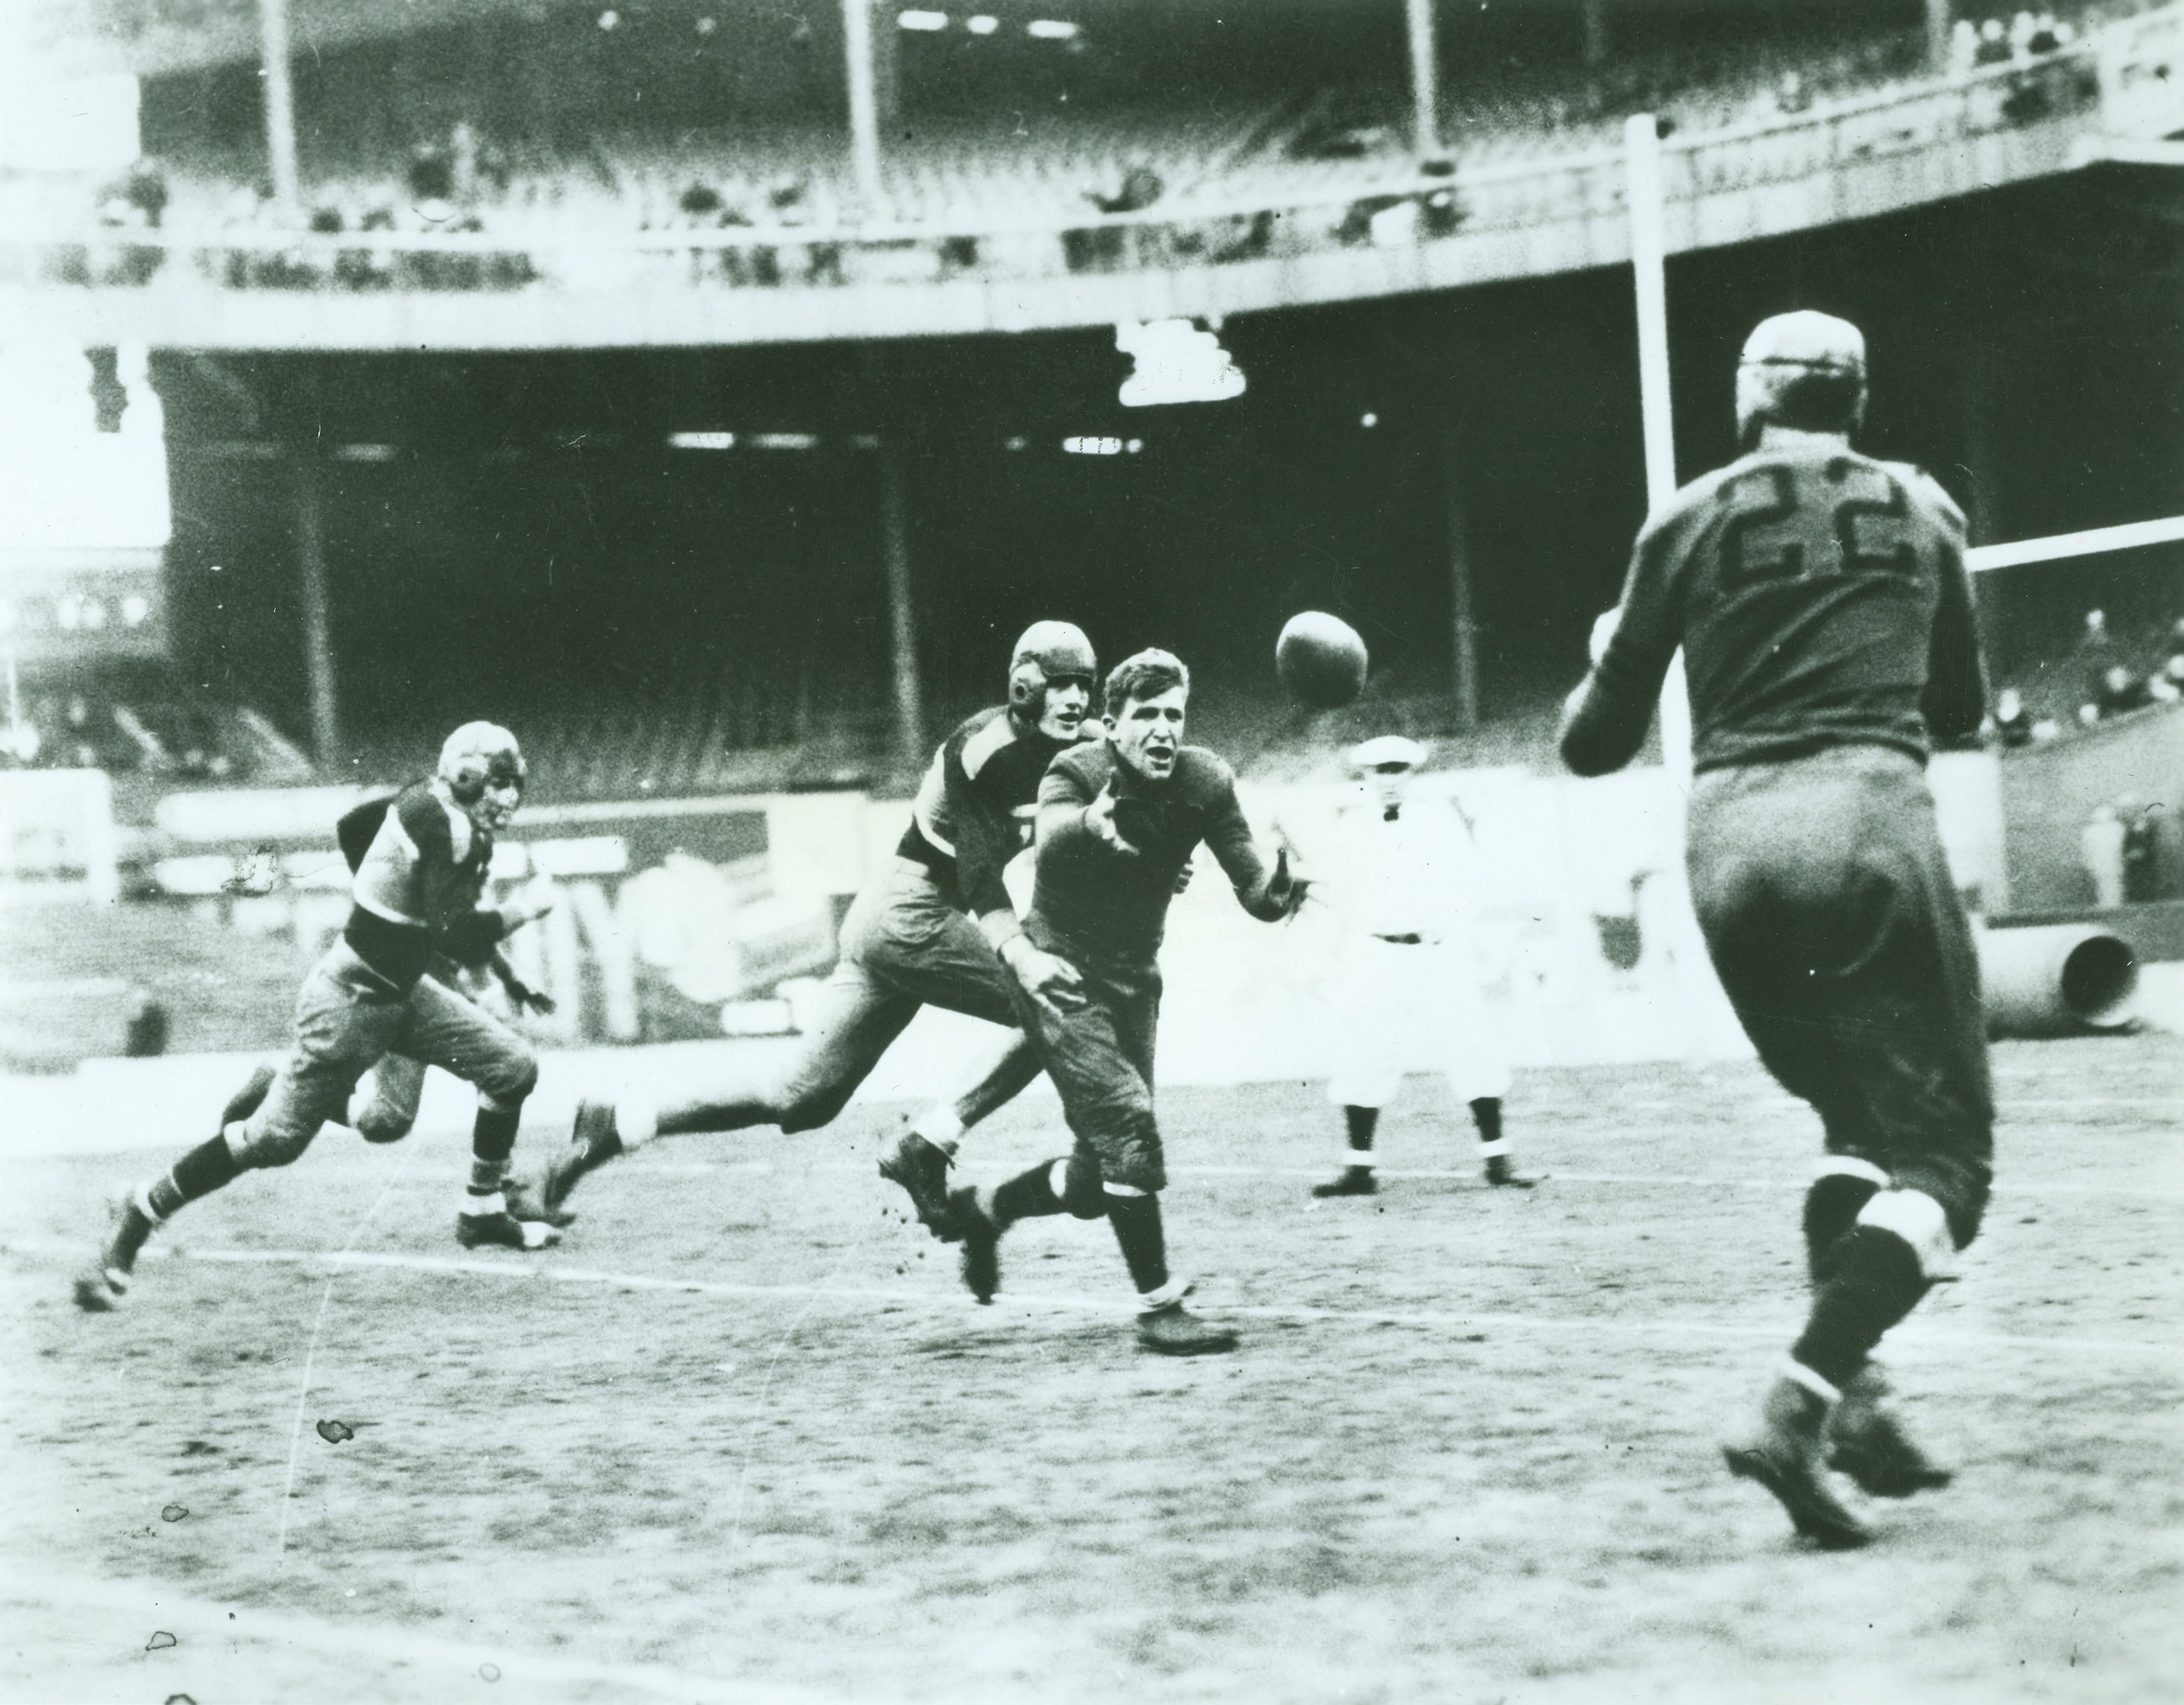 The Chicago Bears defeat the New York Giants in the 1933 championship game.